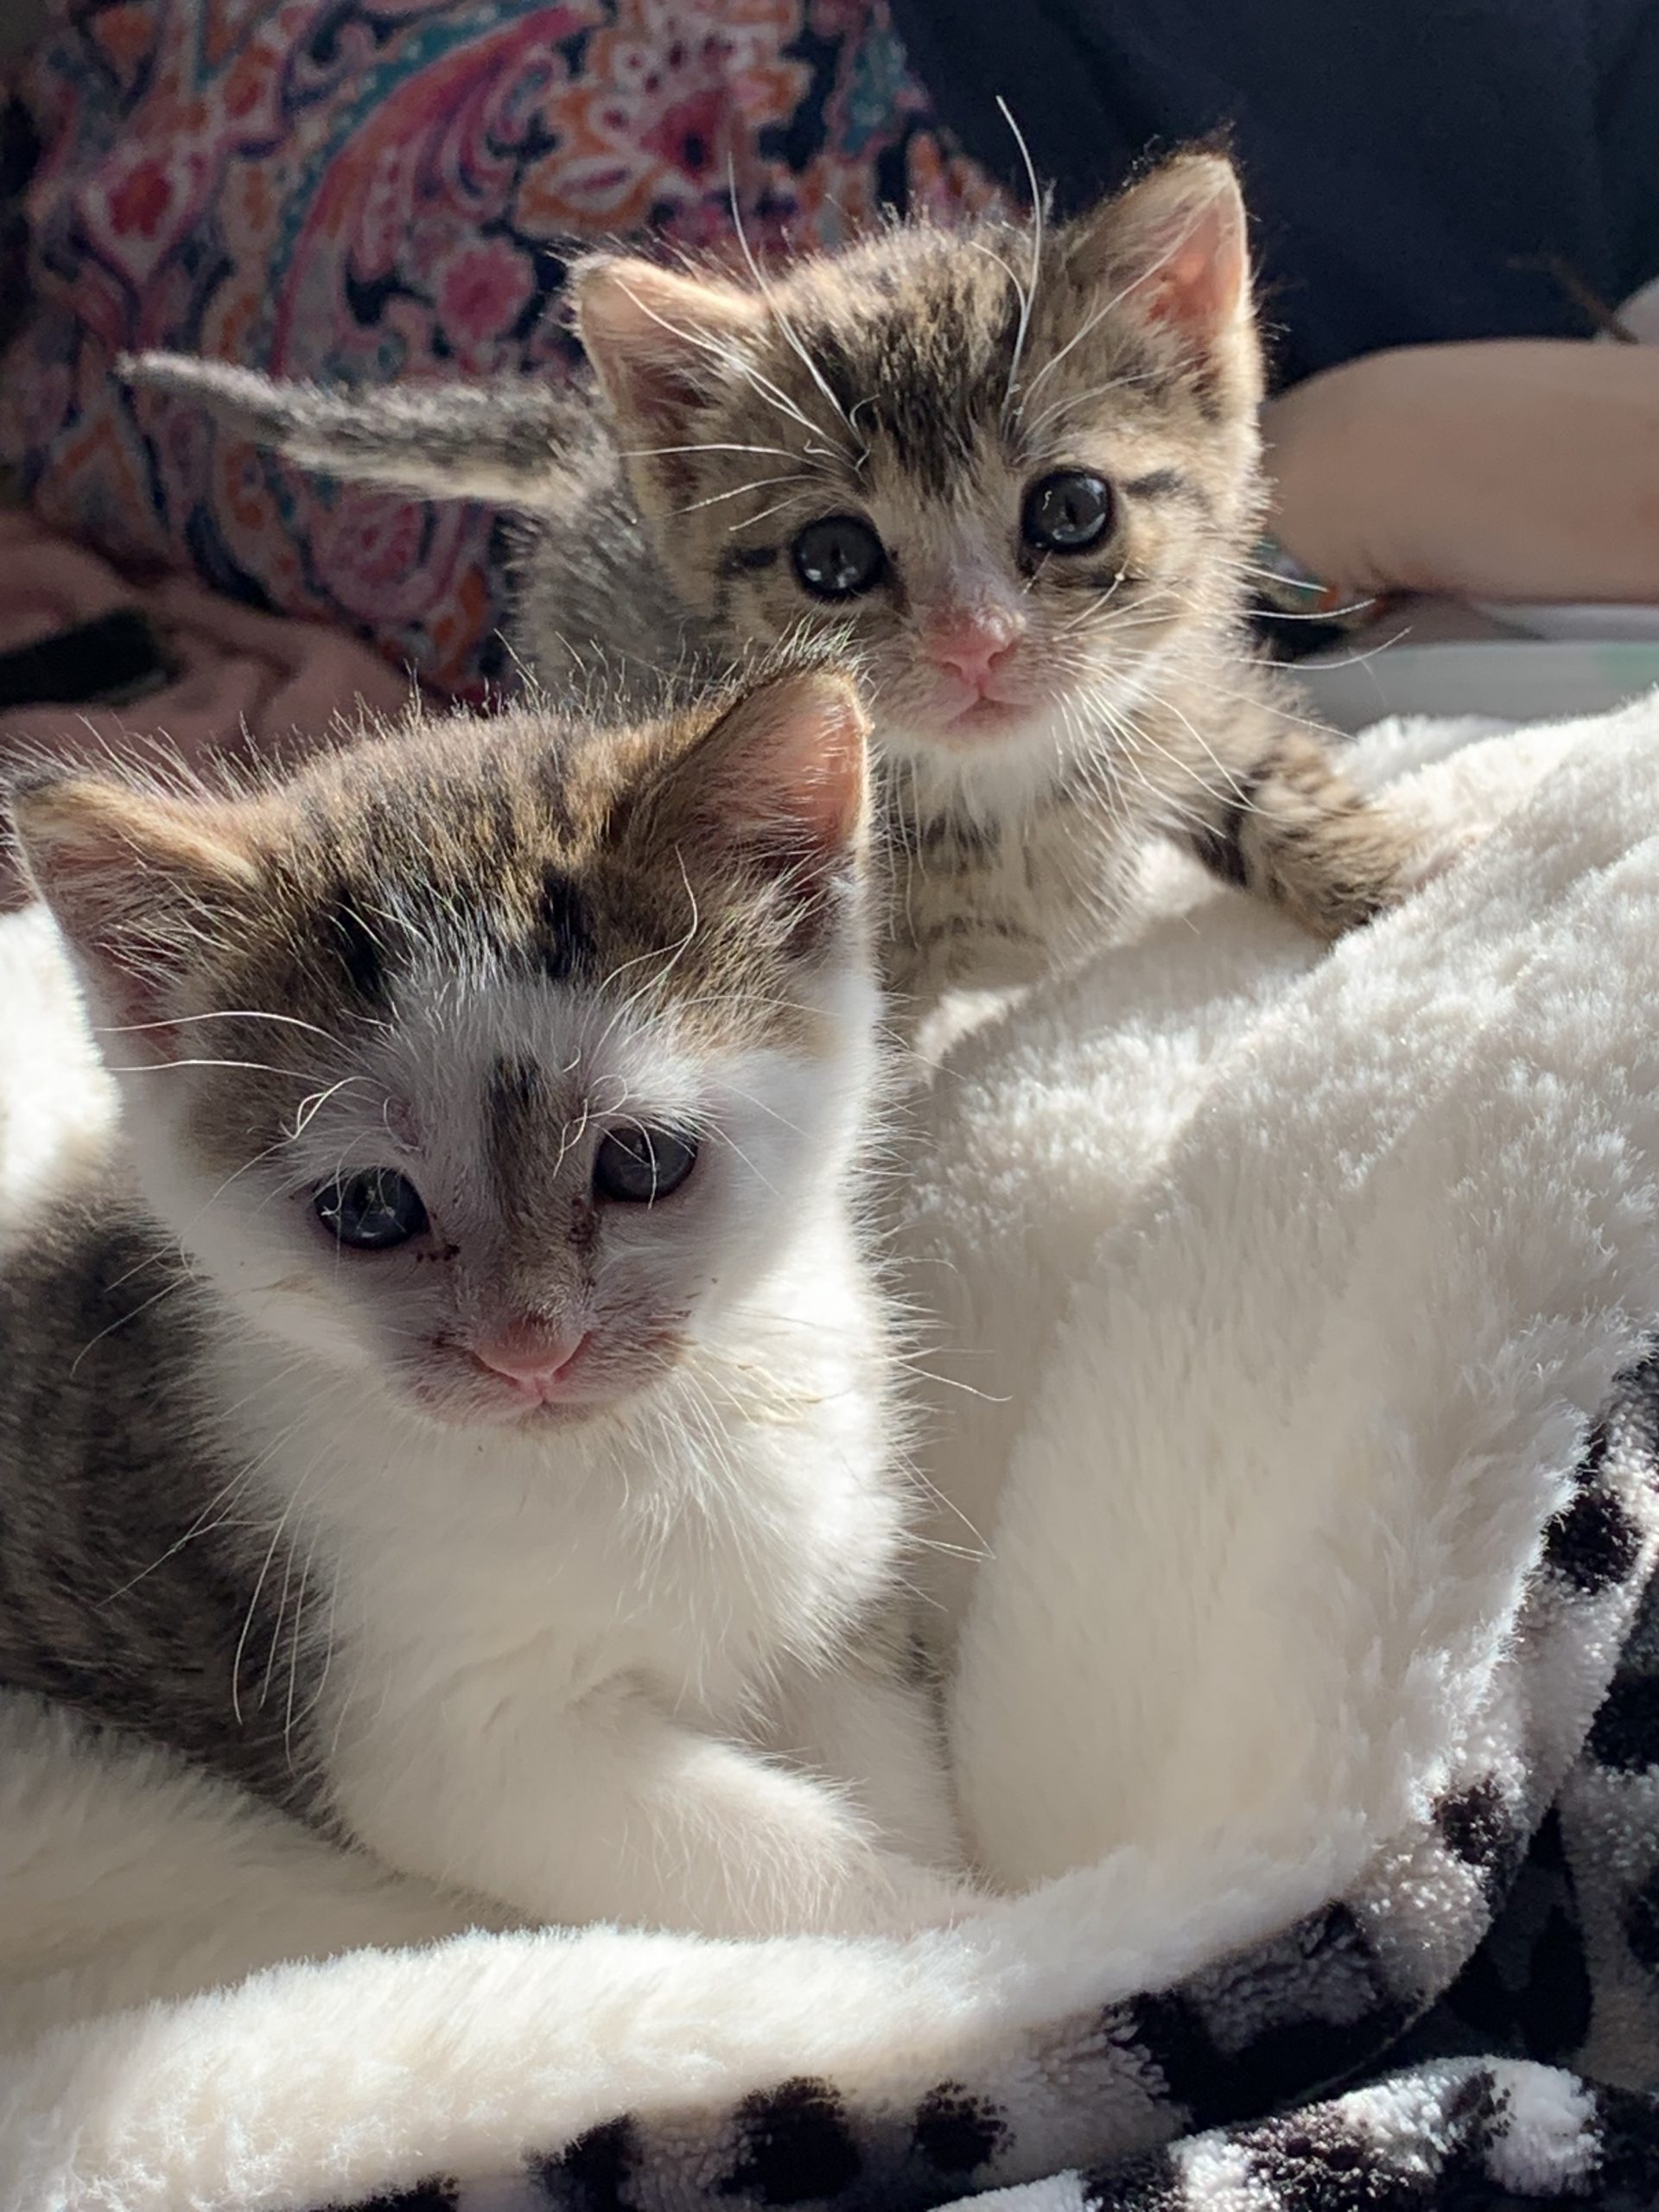 The benefits of adopting two kittens